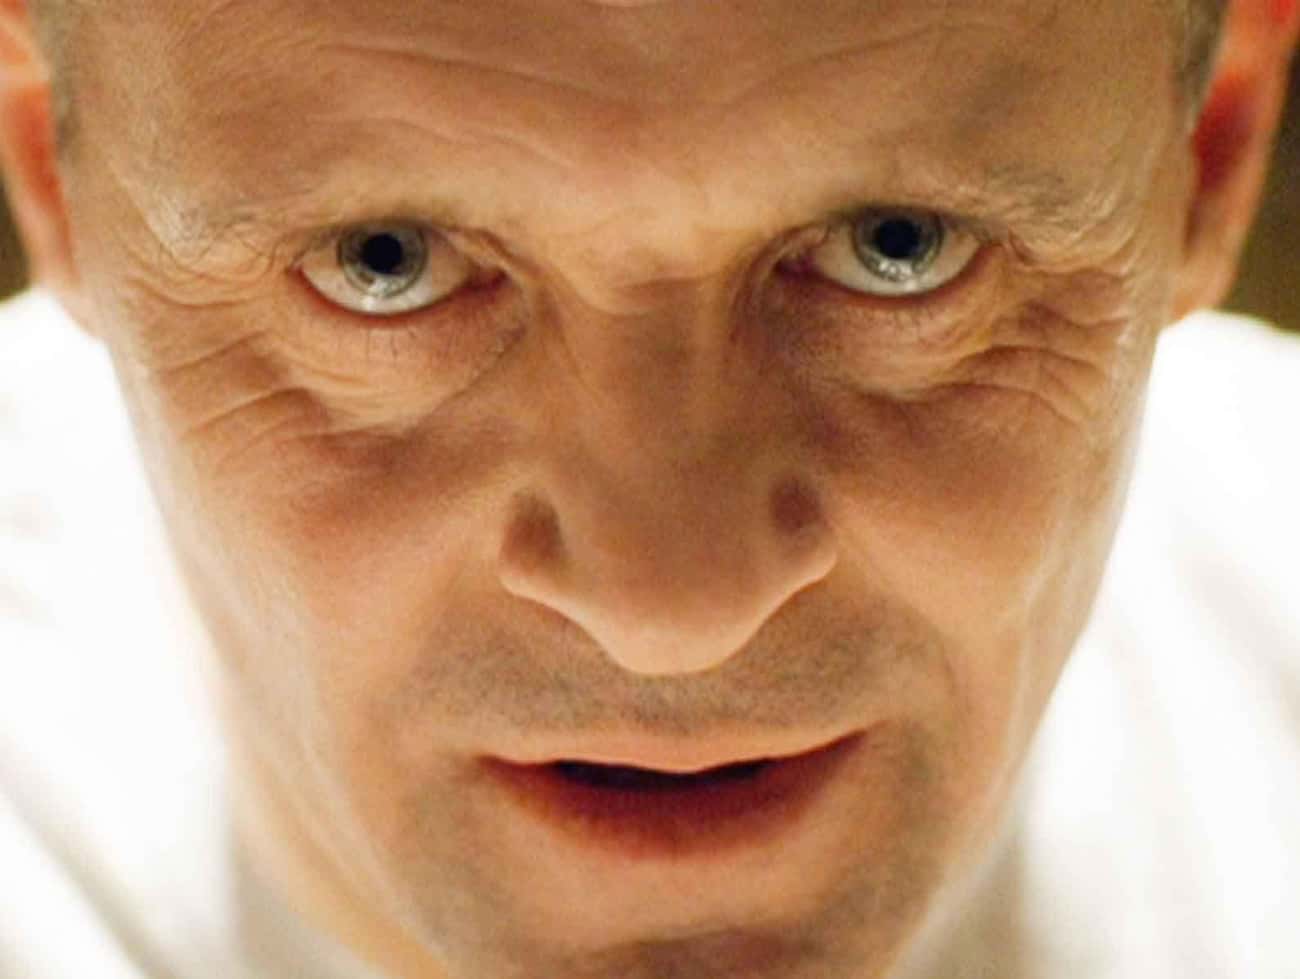 Hannibal Lecter - “They Don’t Have a Name for What He Is.”